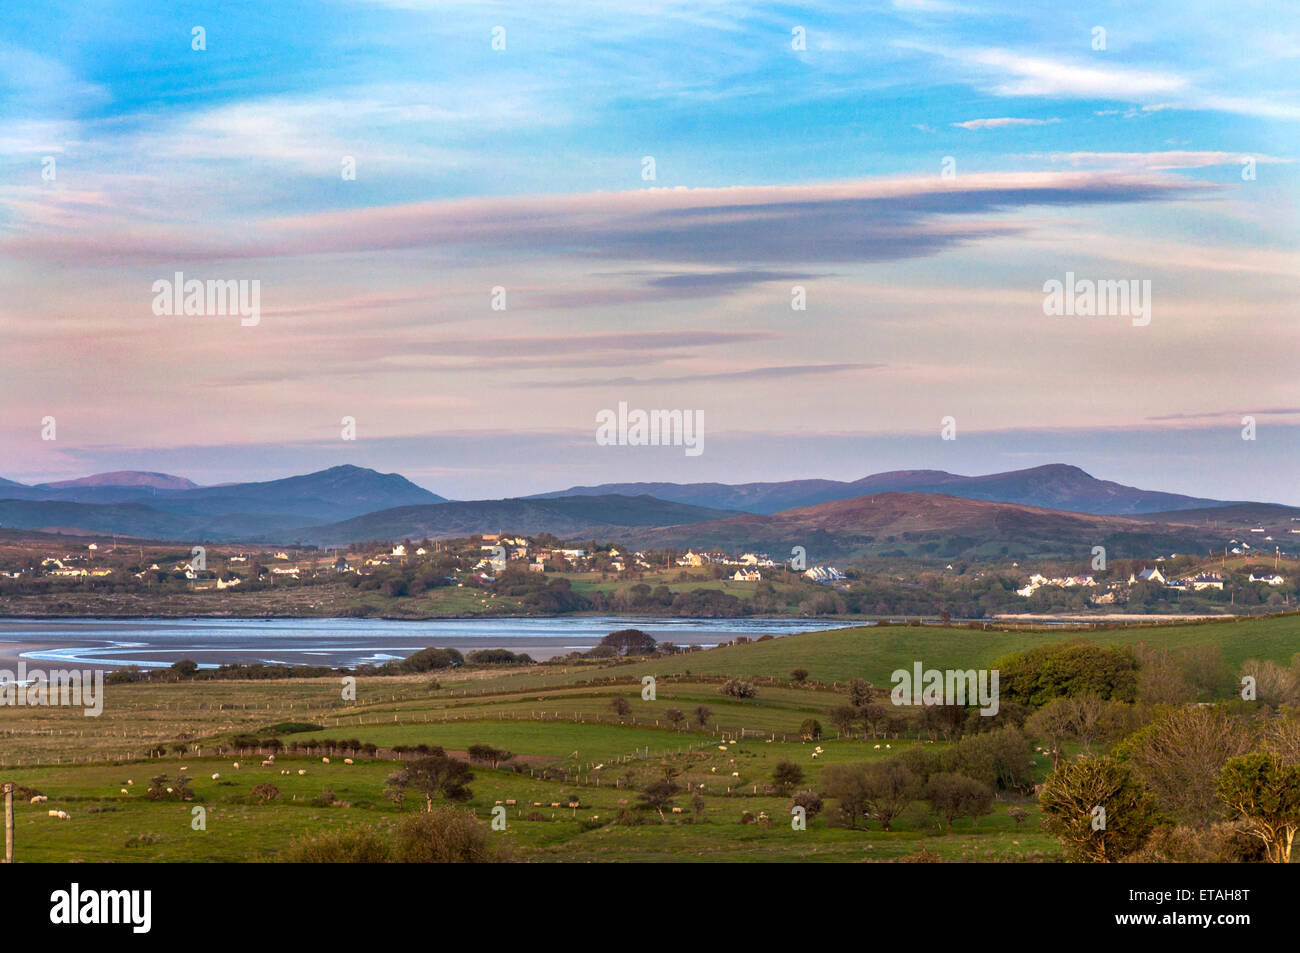 Abends Blick auf Ardara, County Donegal, Irland Stockfoto